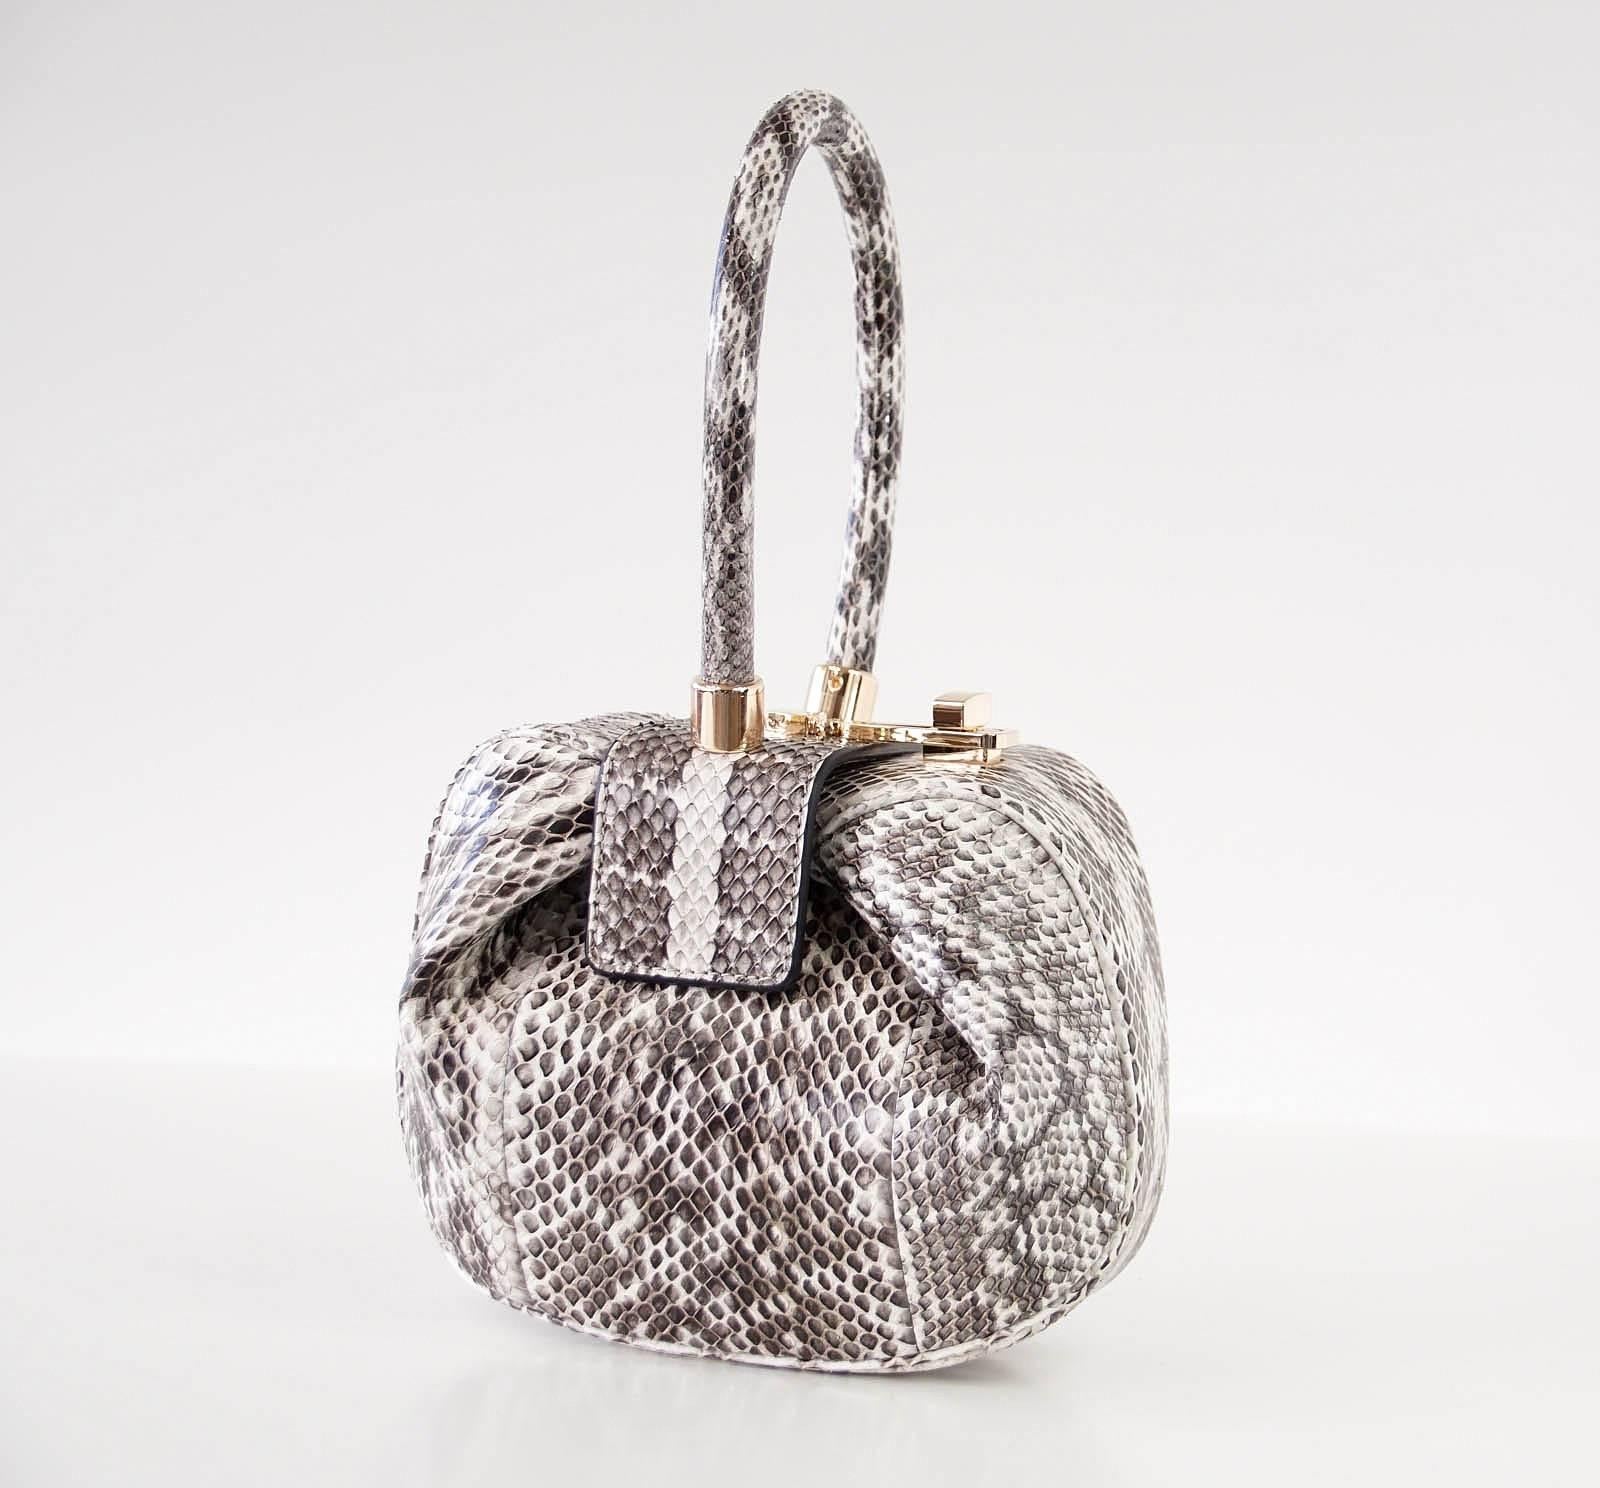 PurseBlog: One of the 8 most important important bags in the World right now!

Guaranteed authentic Limited Edition Nina bag in winter white, gray black and and taupe snakeskin.
Rose gold toned hardware with turn-lock top.
Iconic shape and rolled